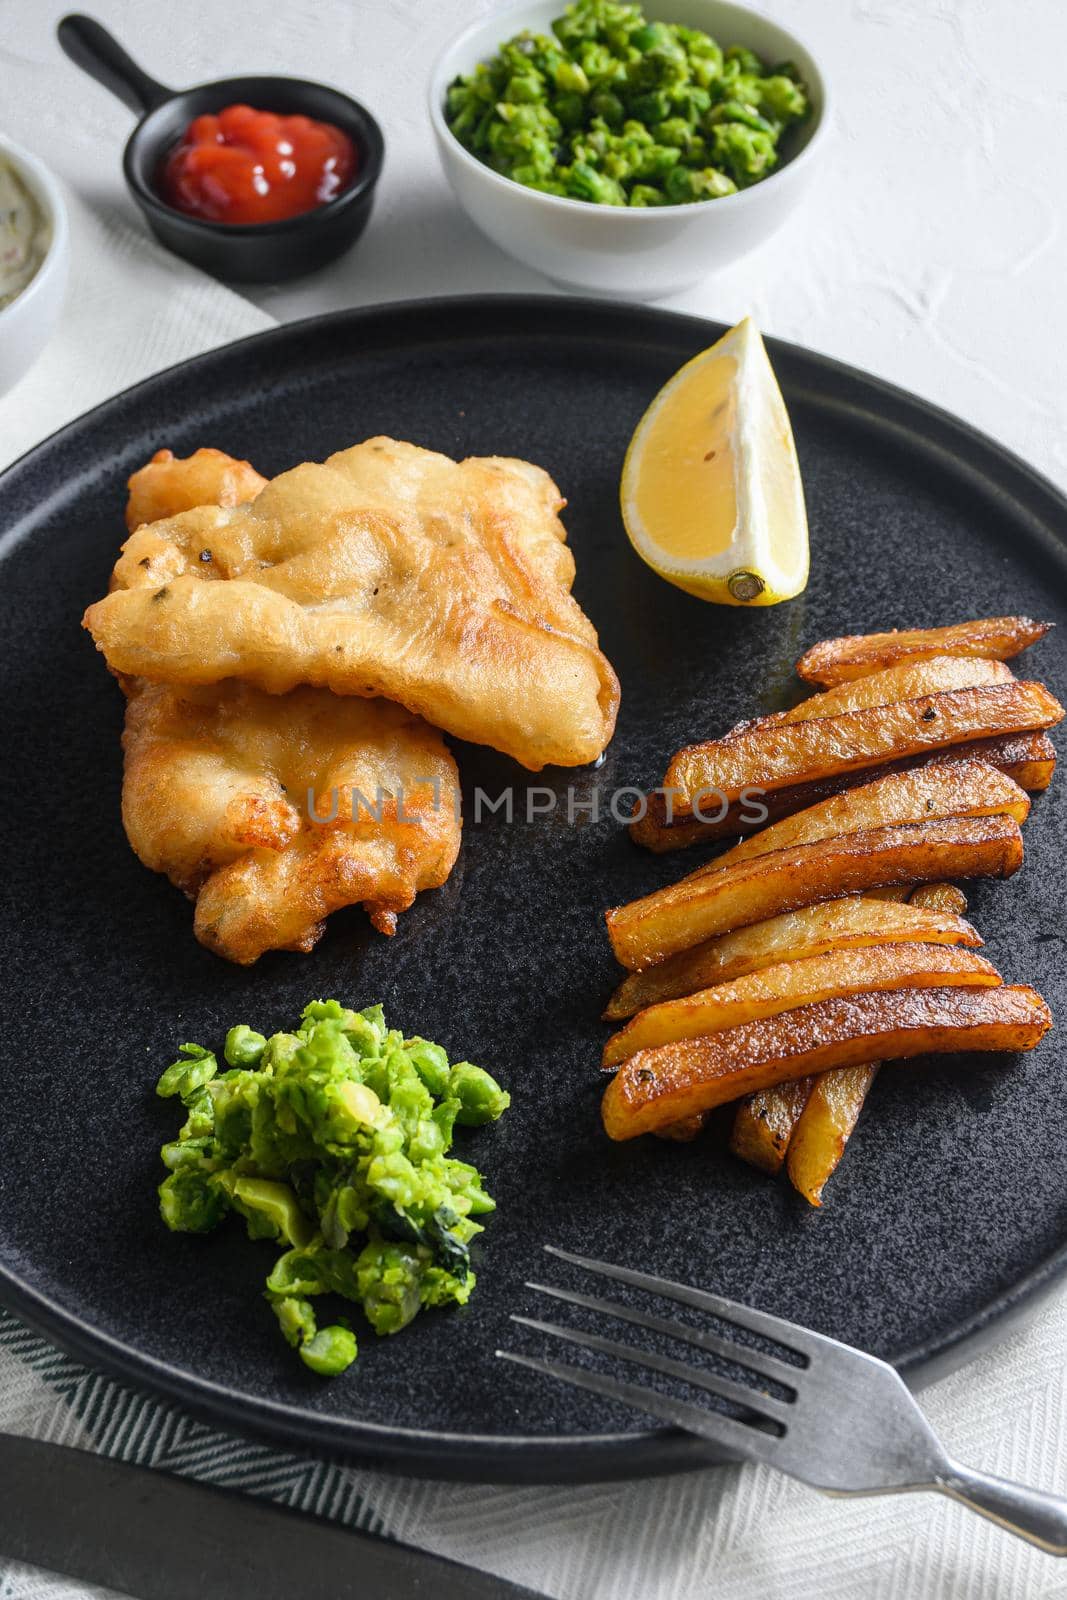 British Traditional Fish and chips with minty mashed peas detail and a slice of lemon. on black round plate over white lintn and stone surface by Ilianesolenyi